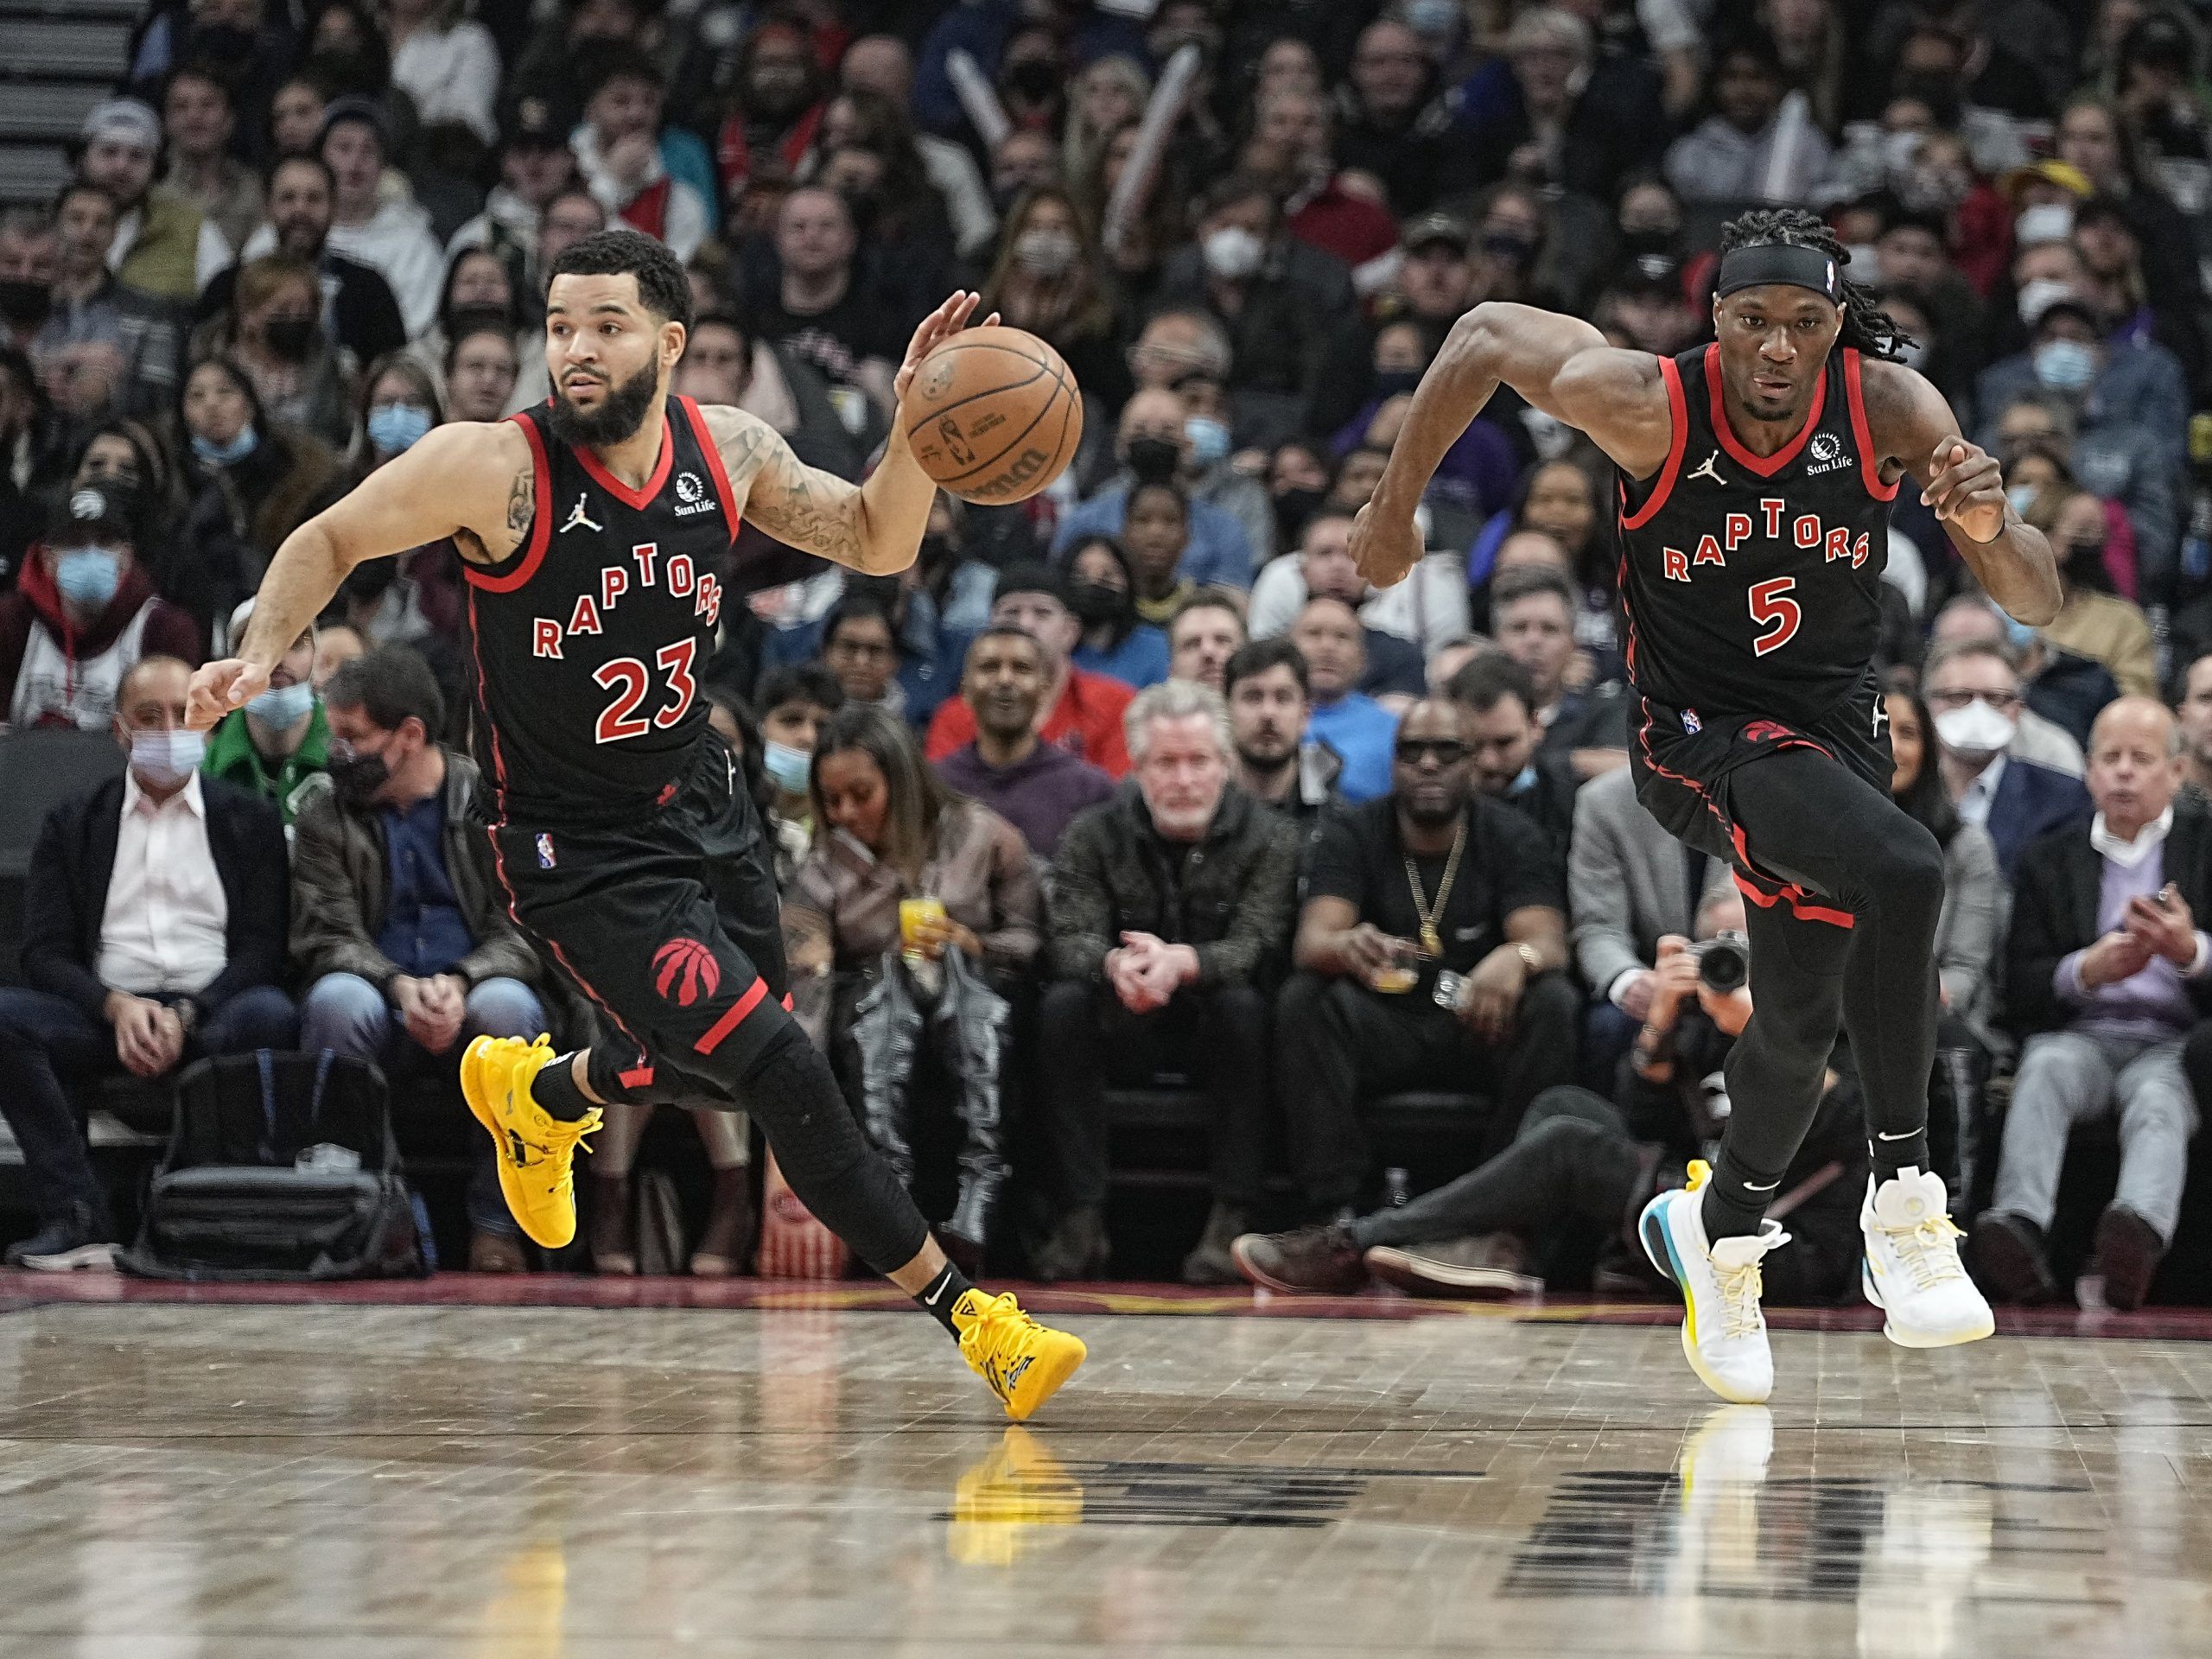 Raptors' Trent Jr. joins Siakam, Banton in health and safety protocols